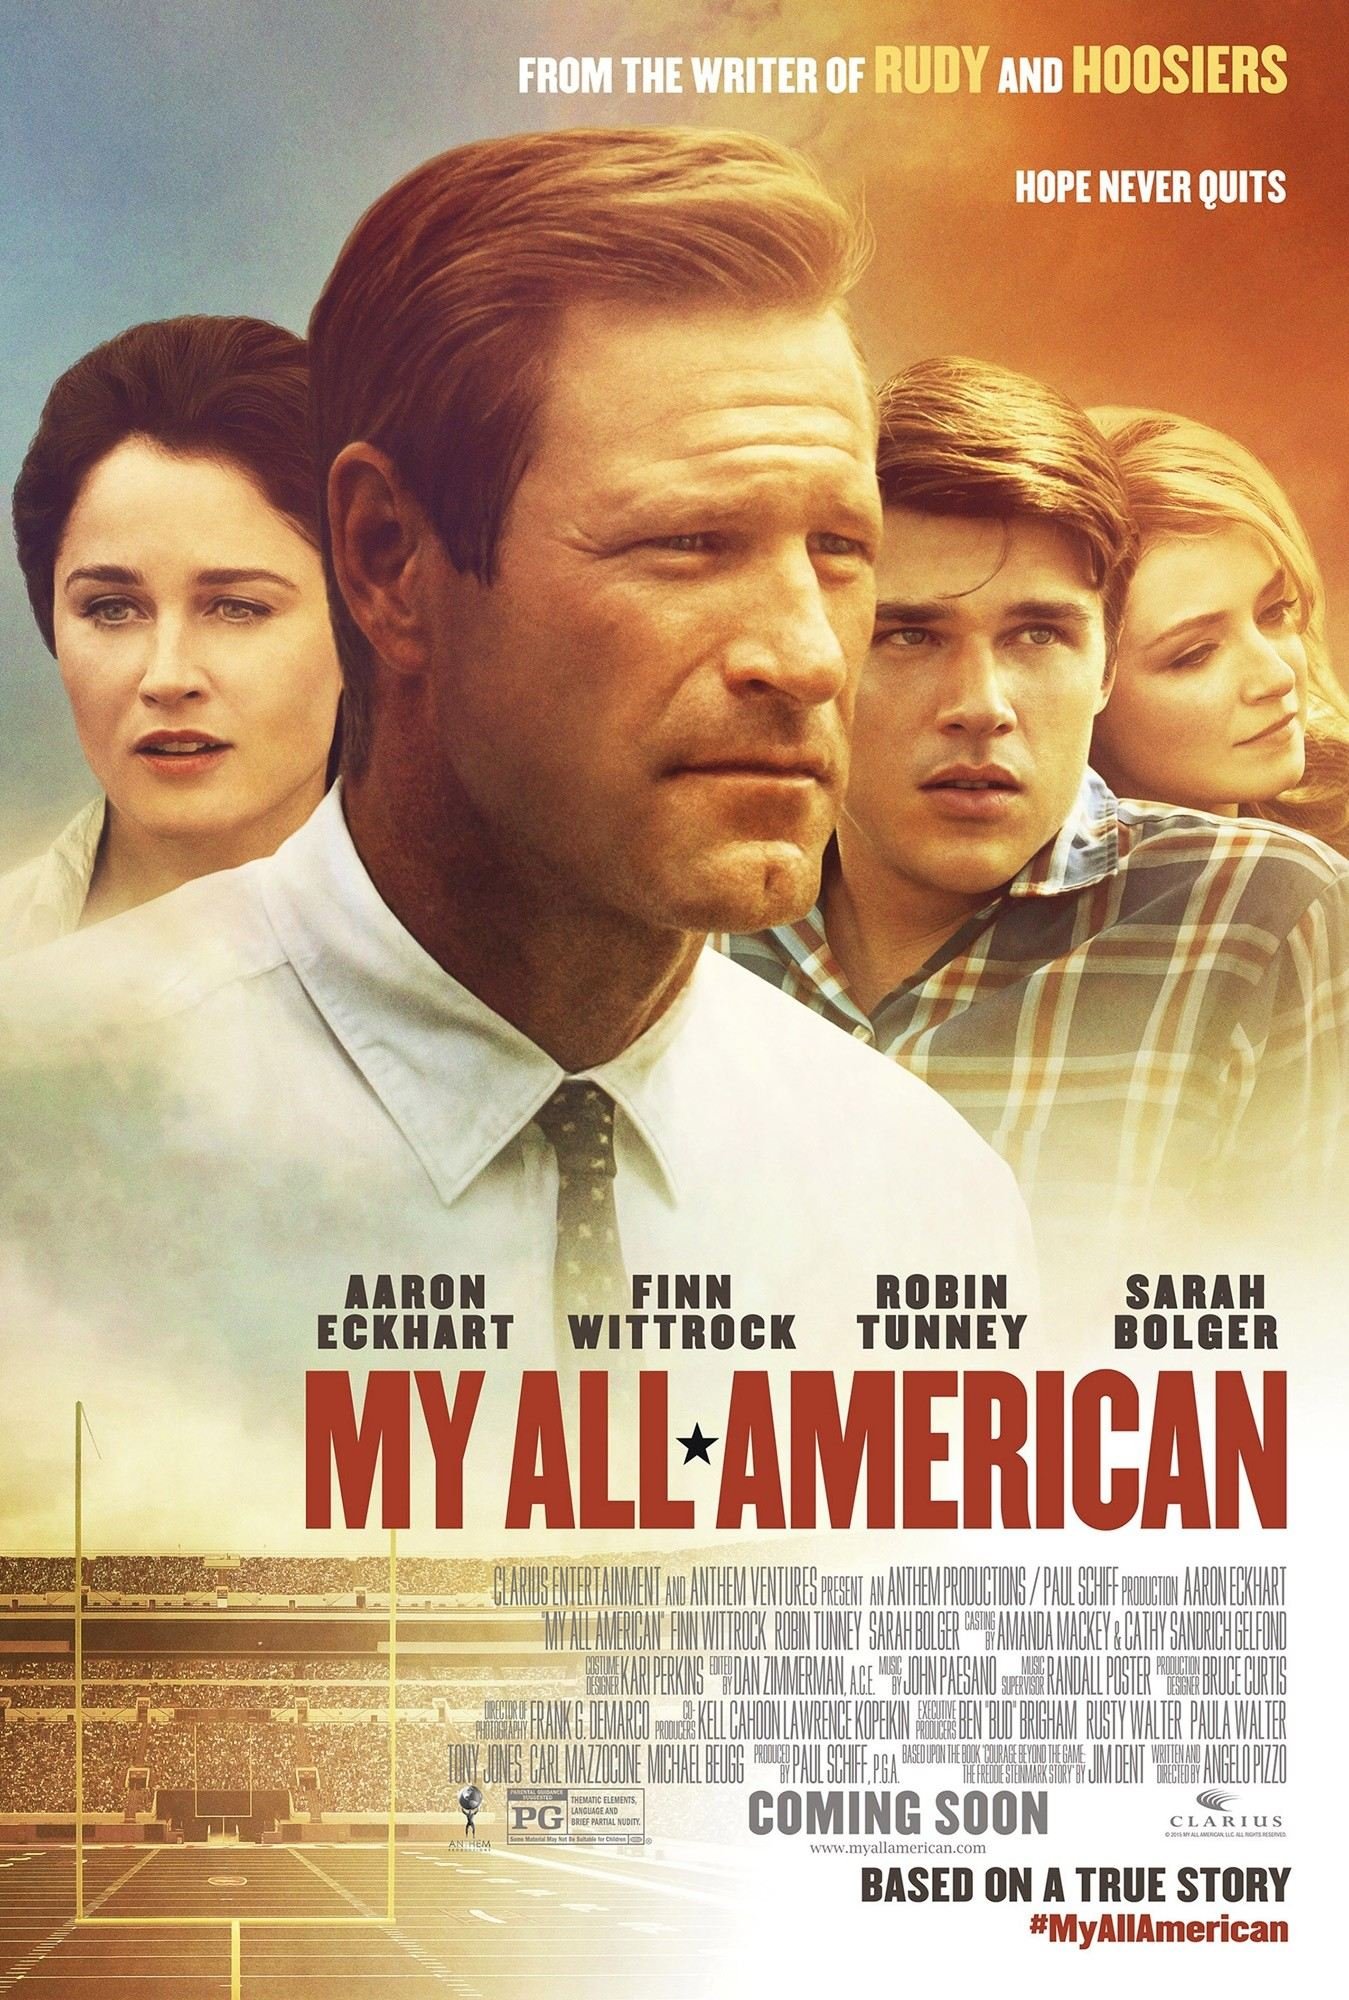 Poster of the movie My All American